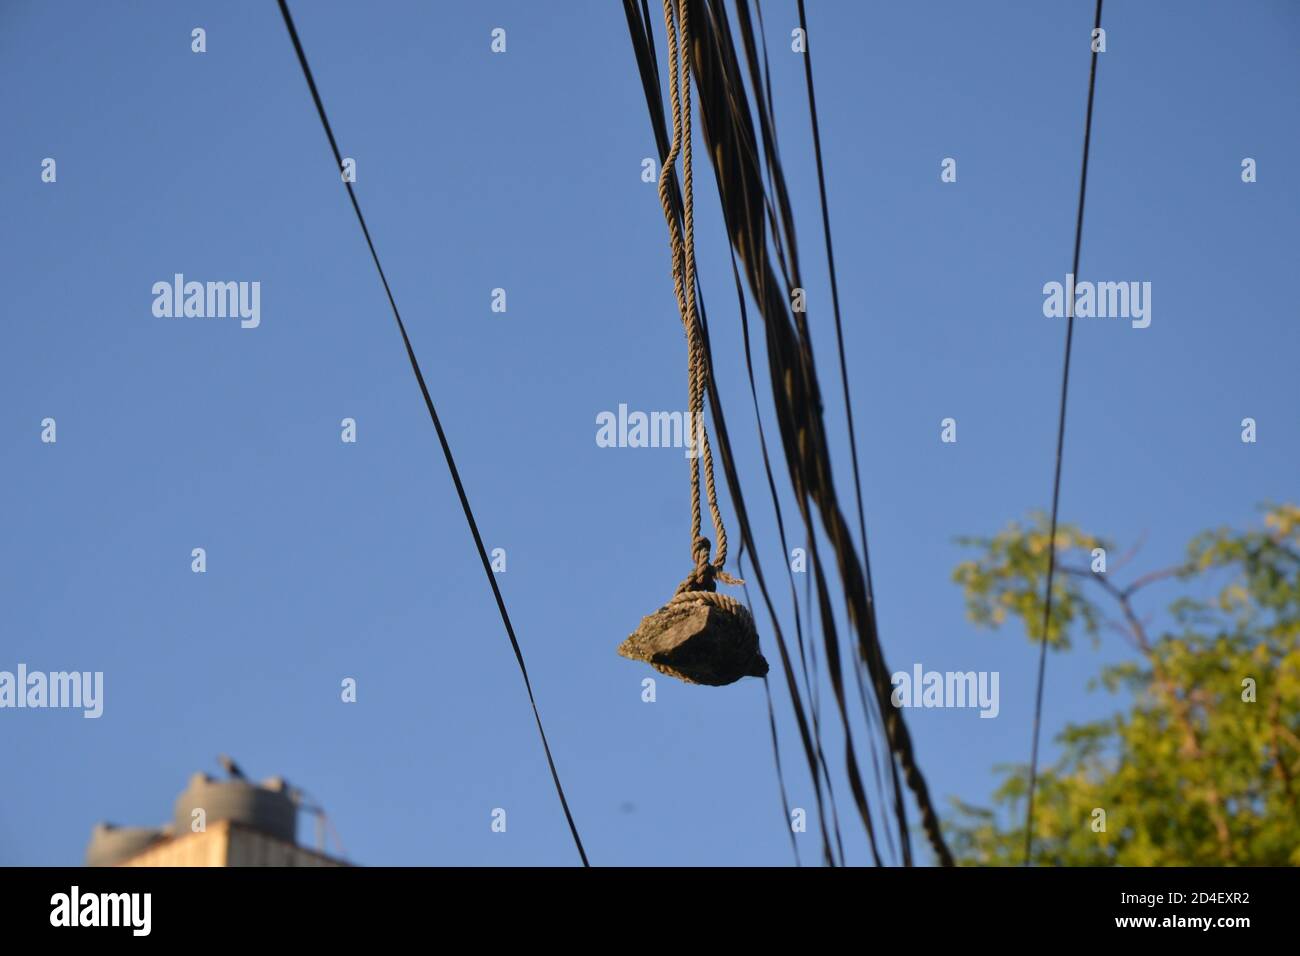 hanging stone on the electric wire for balancing of the wires. Picture taken in Kathmandu, Nepal Stock Photo